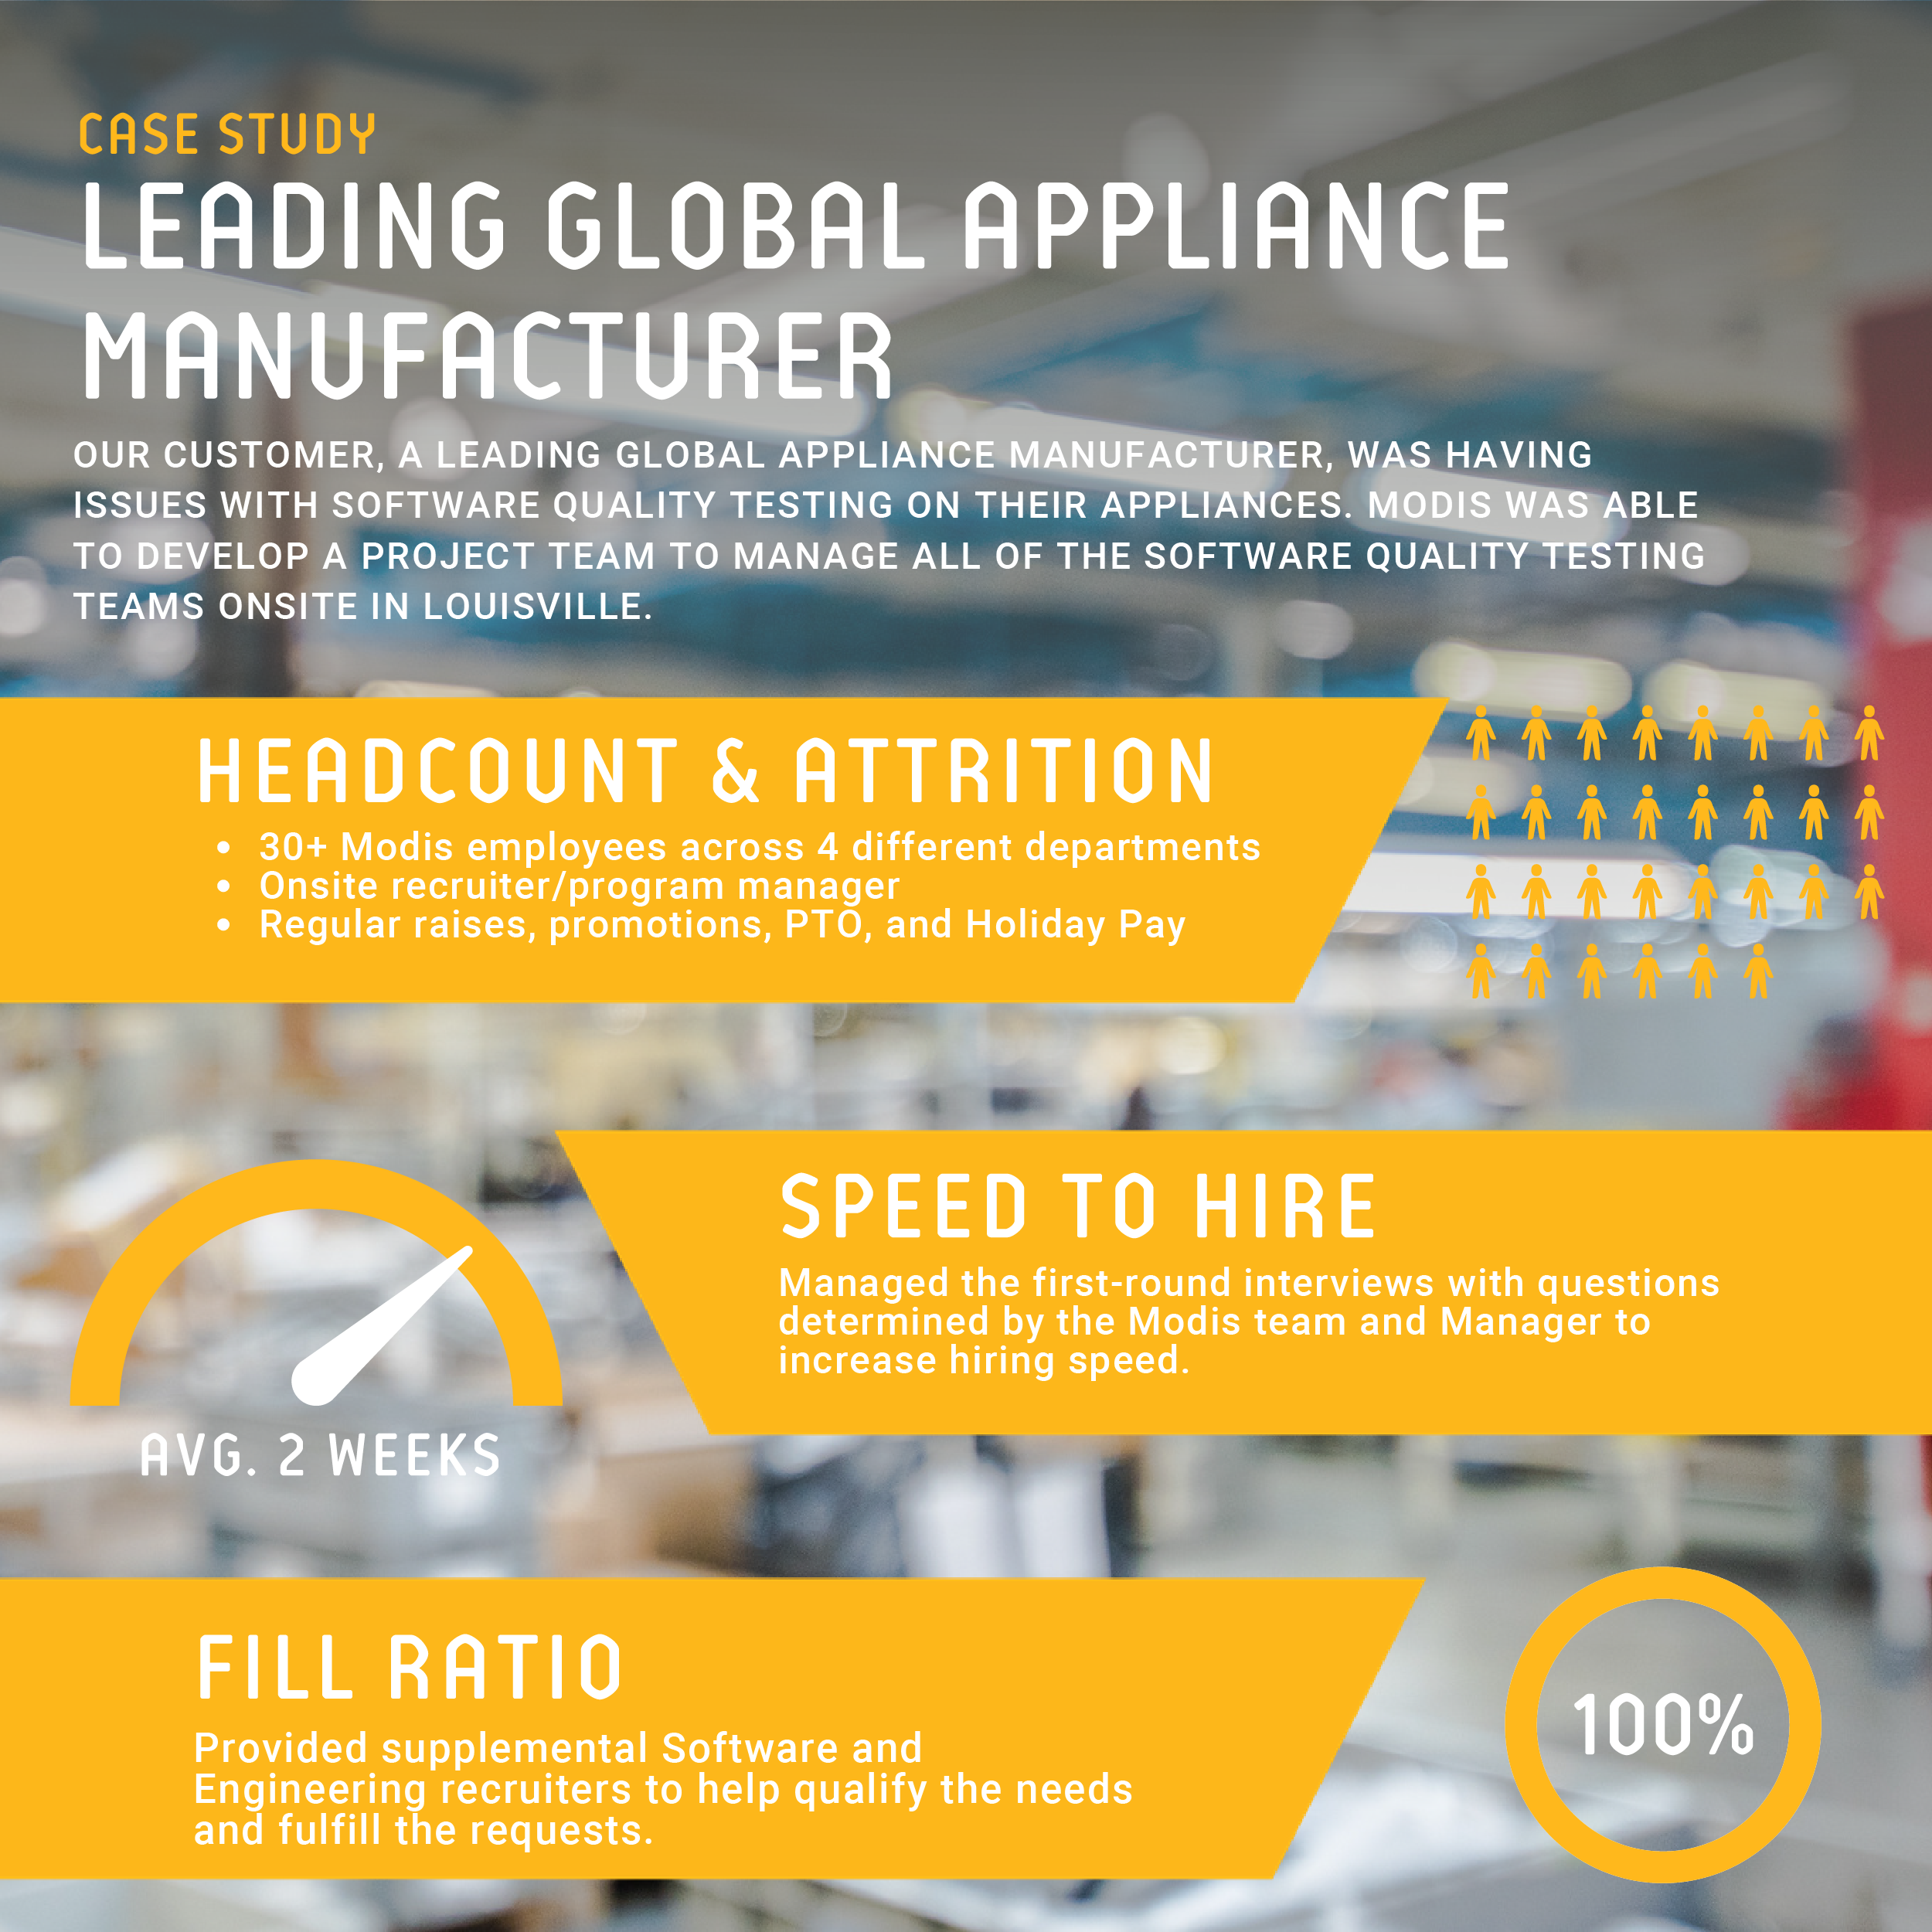 Global Leading Appliance Manufacturer Case Study